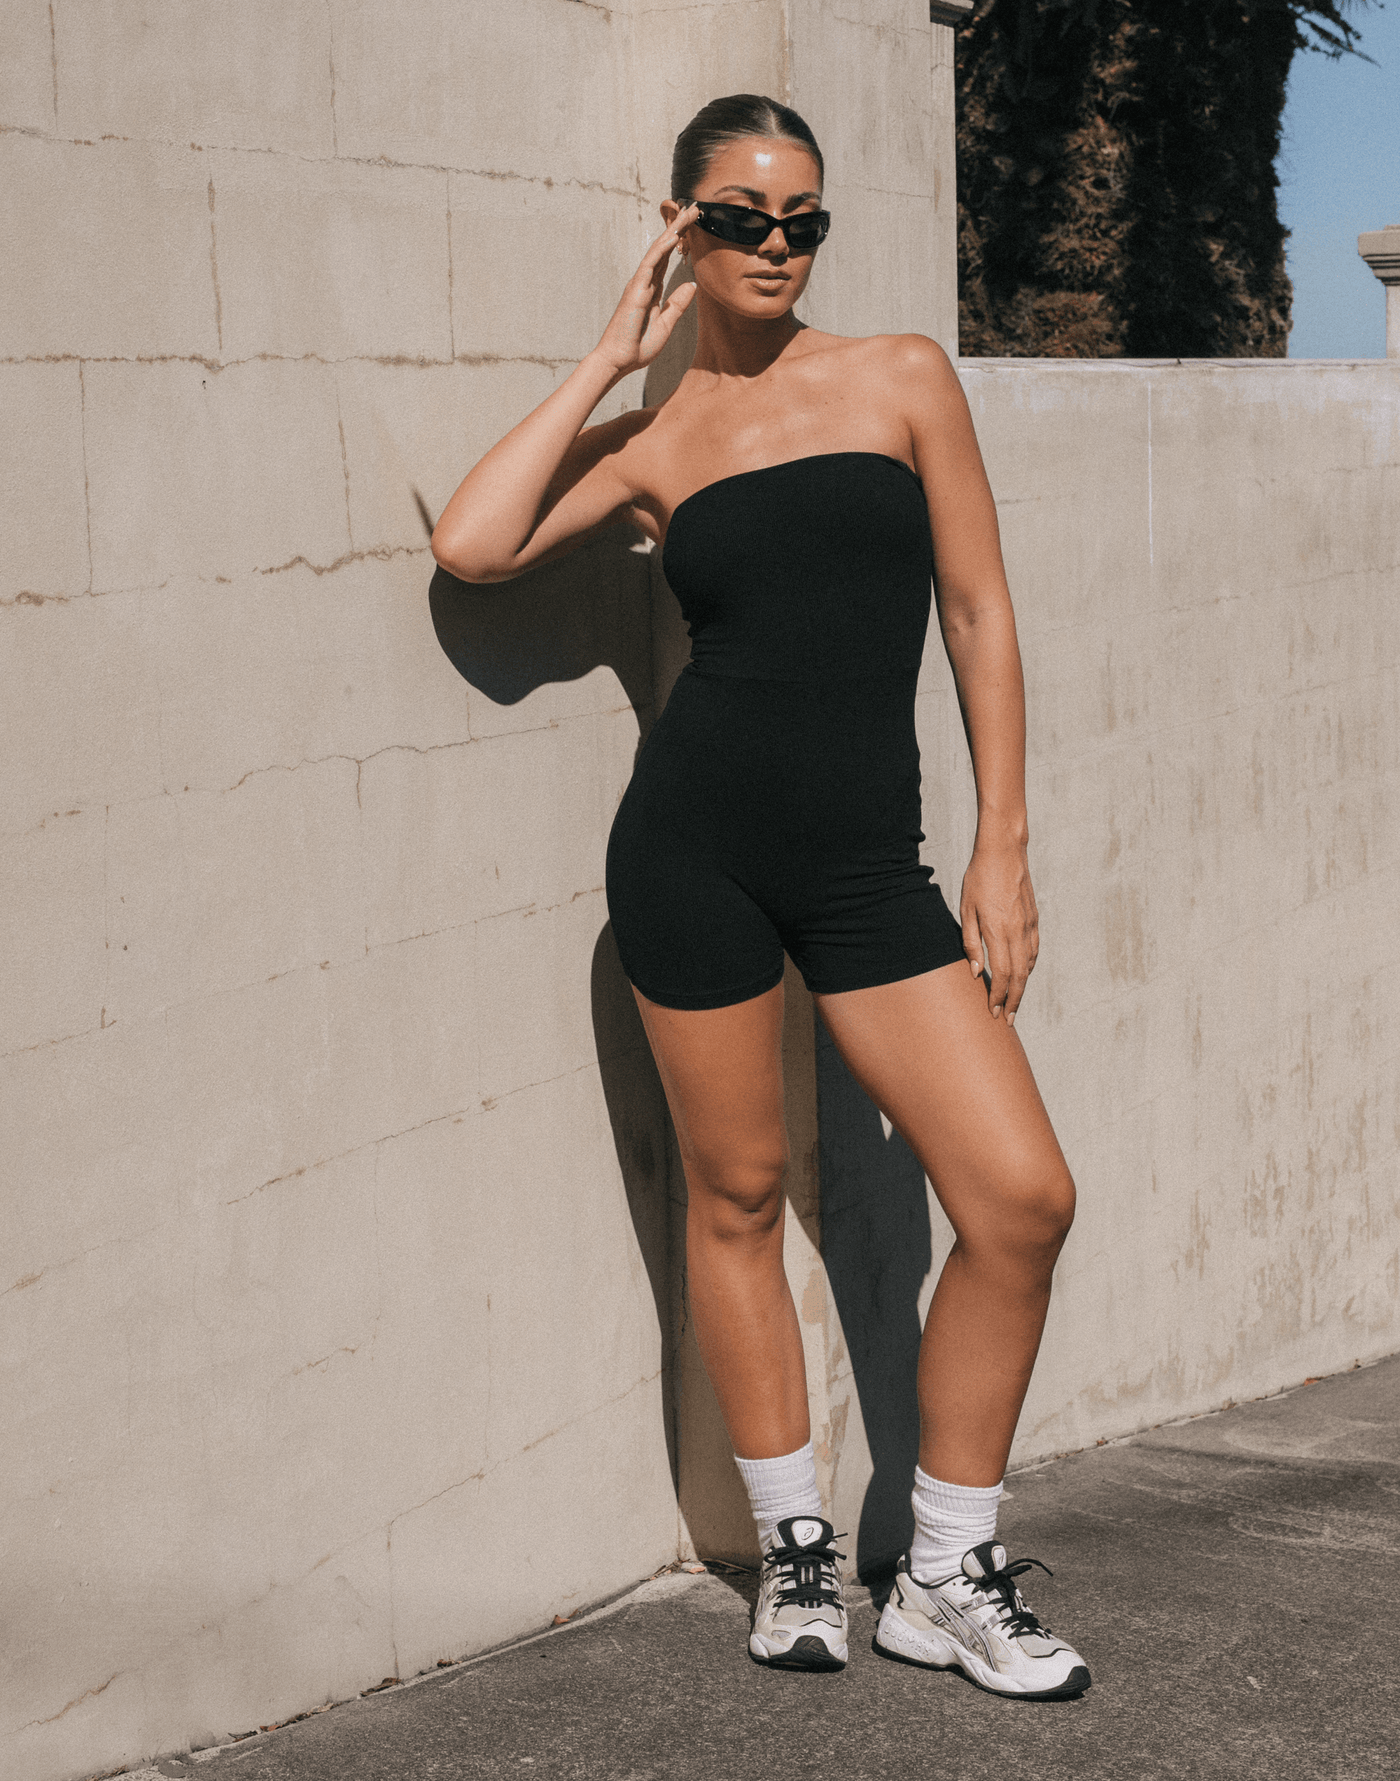 Formations Playsuit (Black) - Black Soft Rib Strapless Playsuit - Women's Playsuit - Charcoal Clothing